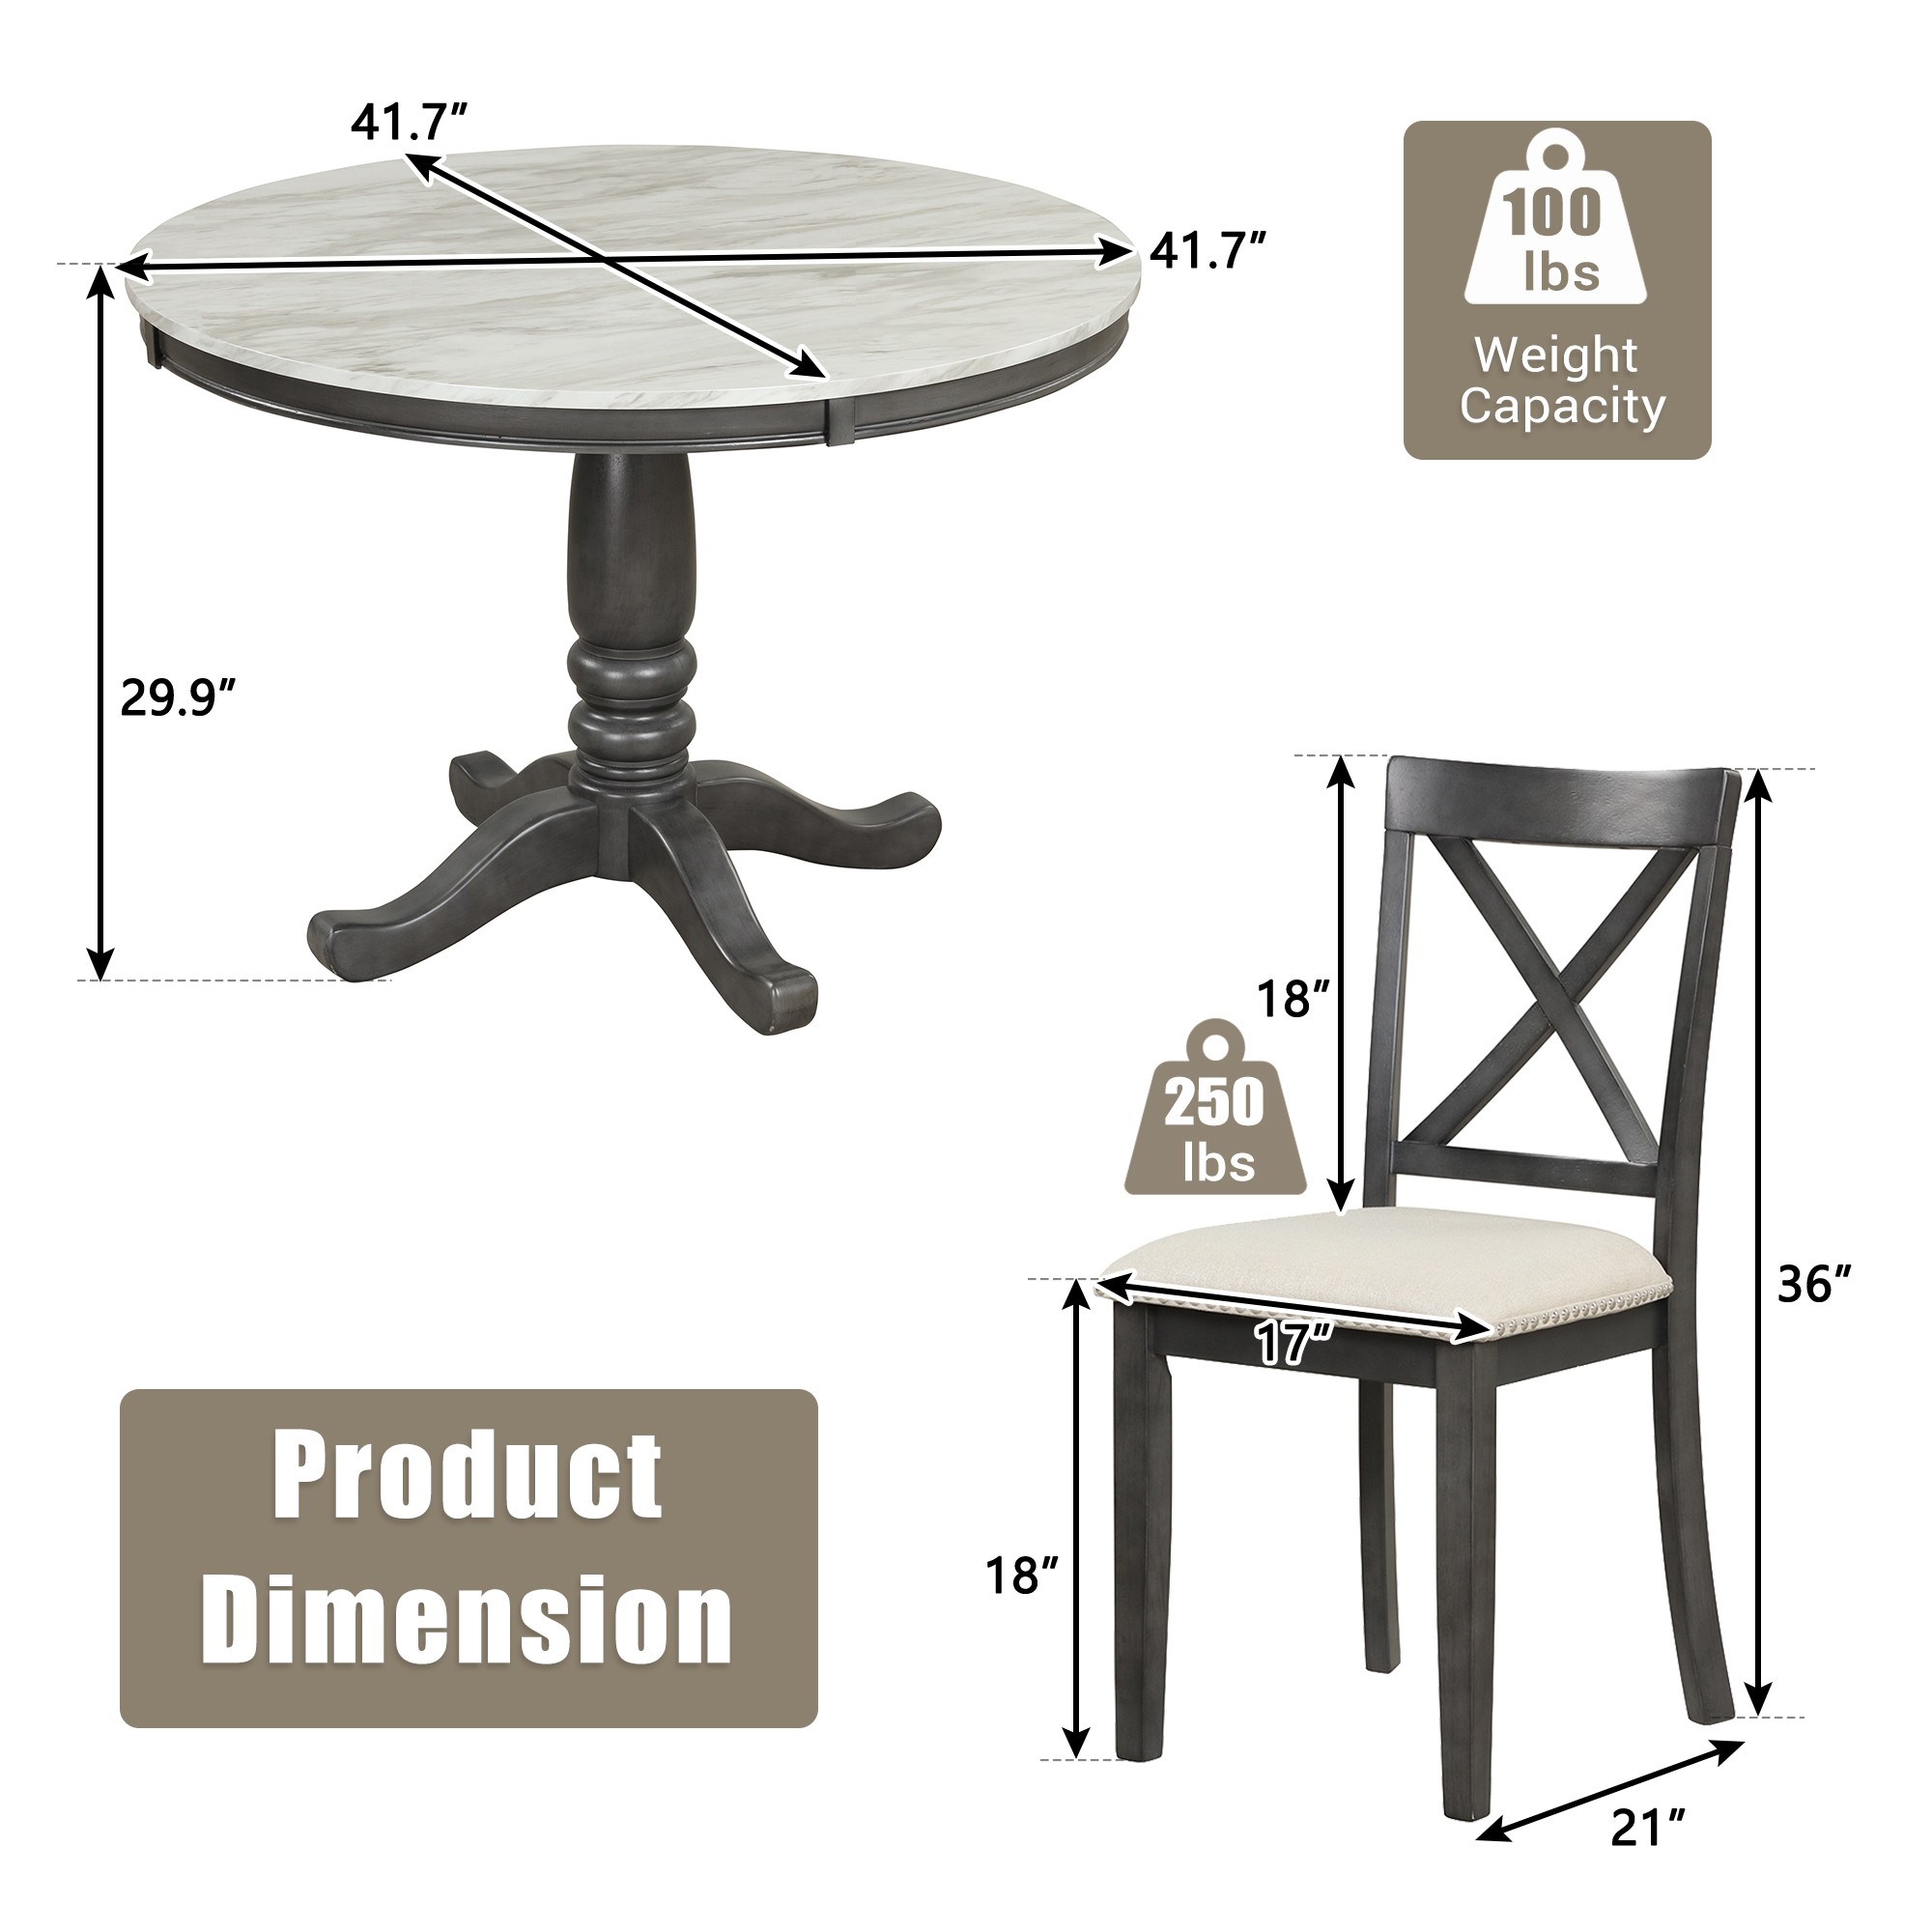 5 Pieces Dining Table and Chairs Set For Four Persons - SG000342AAA